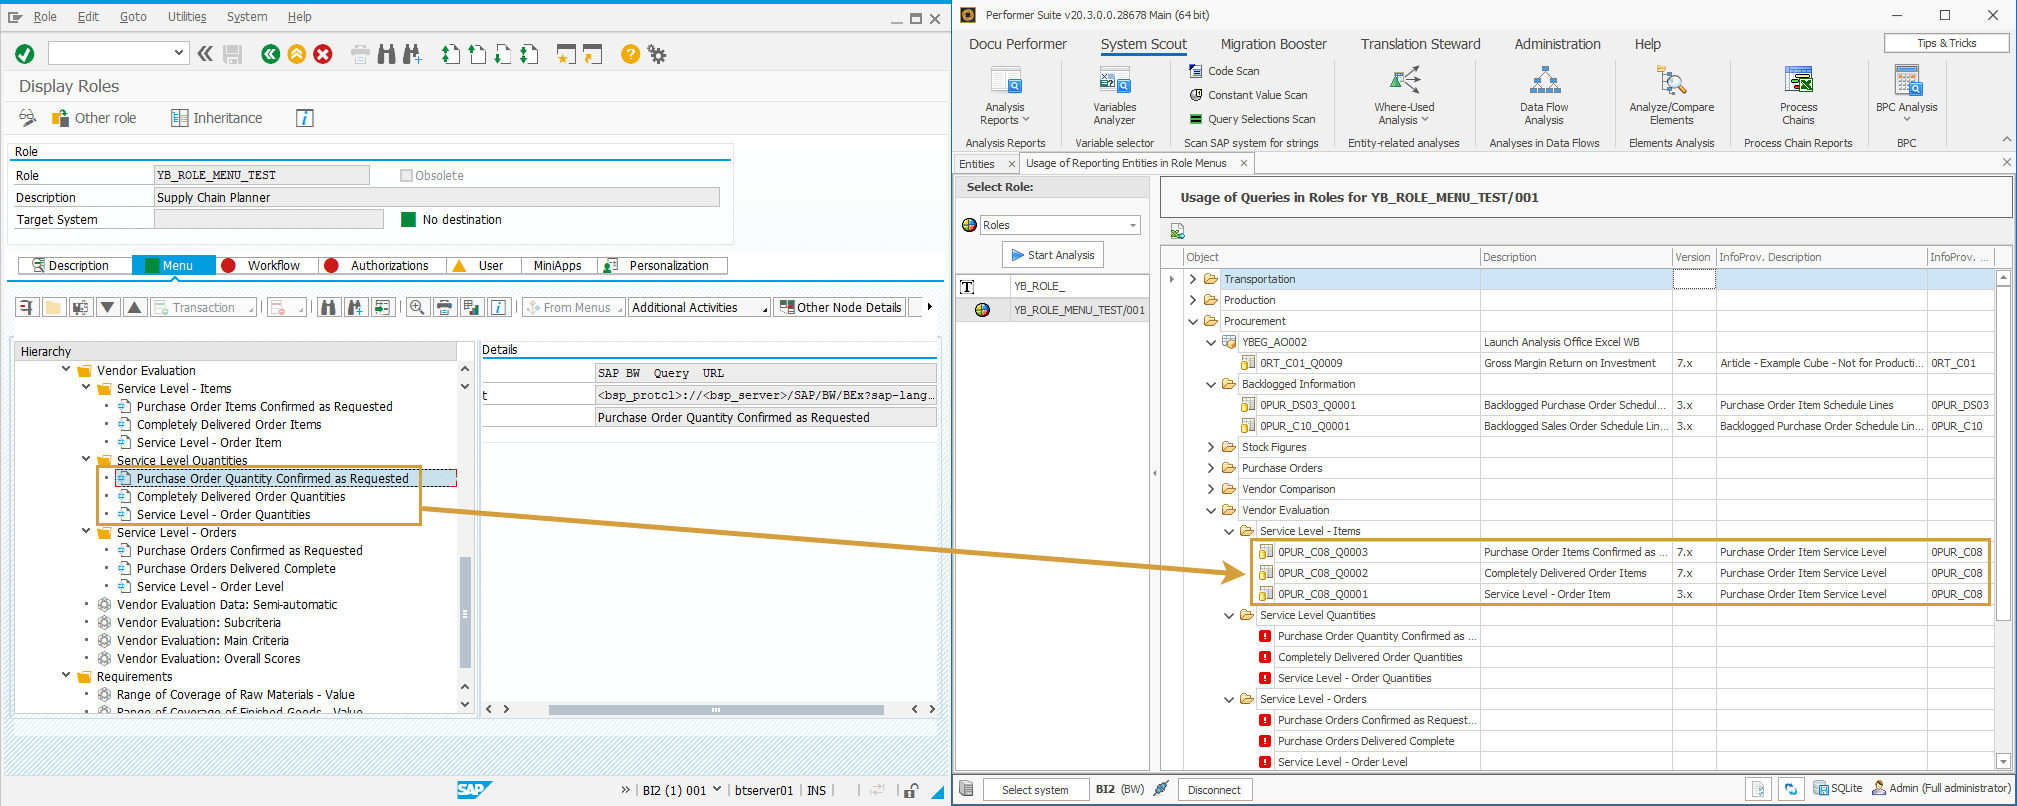 Comparison of the buildup of a role in SAP GUI and the System Scout